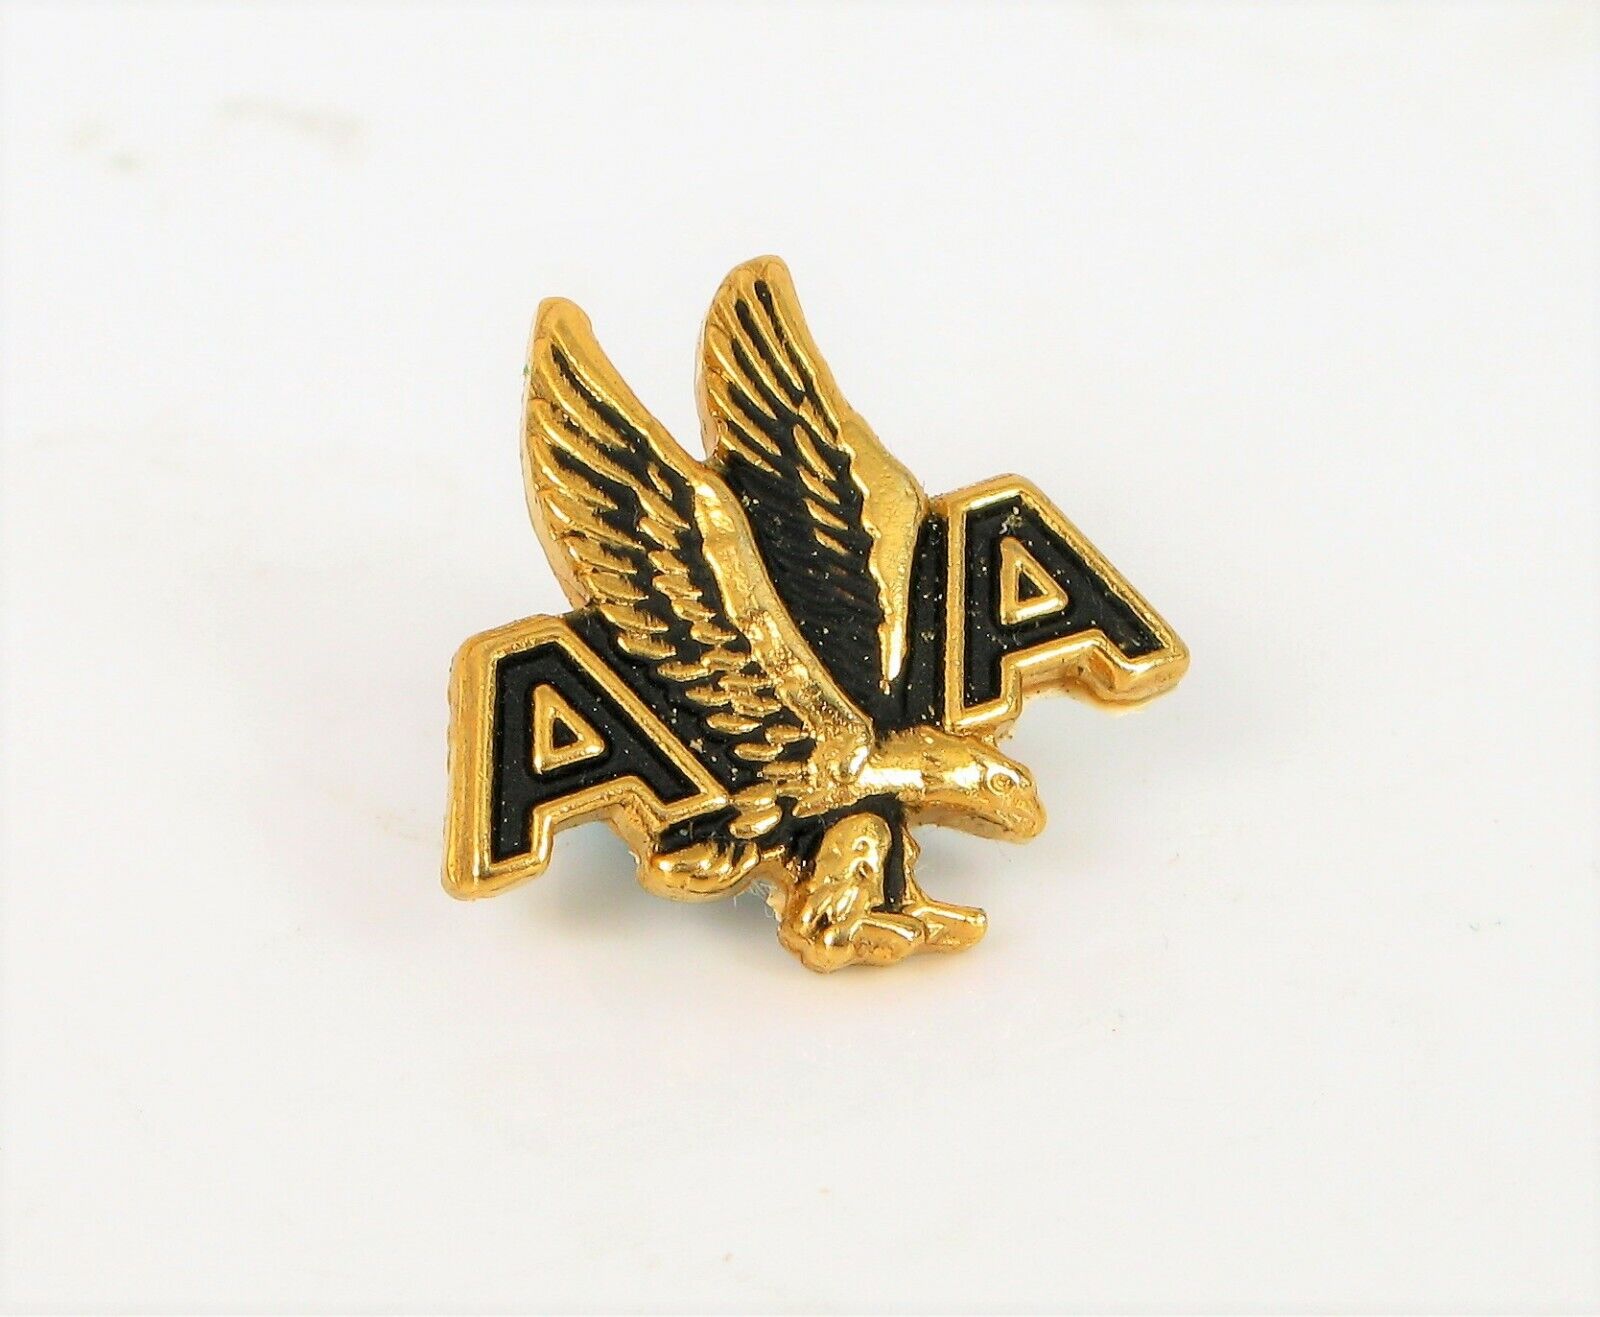 VINTAGE AMERICAN AIRLINES EMPLOYEE AWARD FLYING EAGLE EMBLEM GOLD TONE 5 YEAR